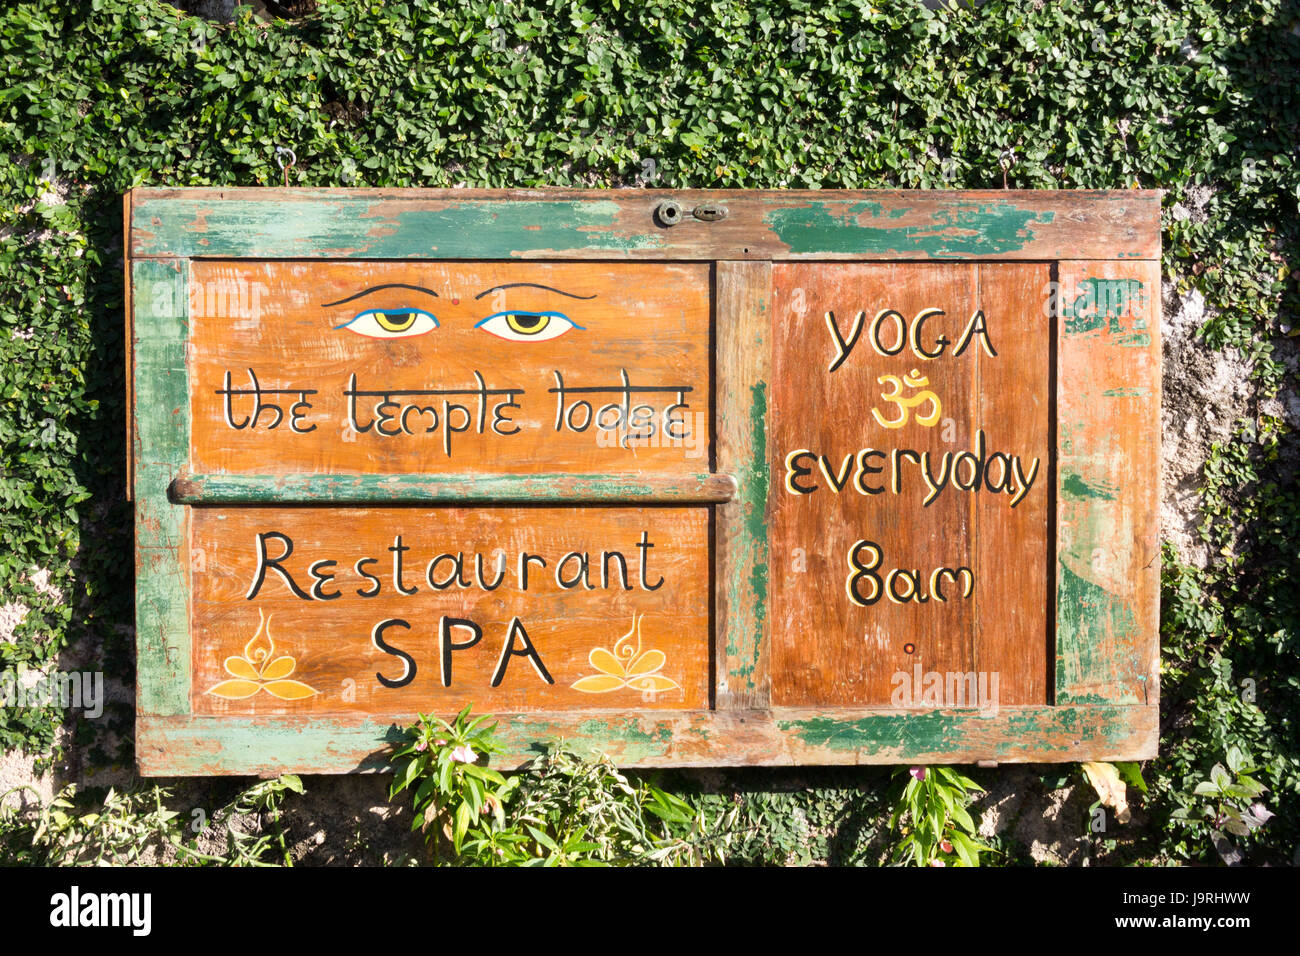 Sign on wall advertising the Temple Lodge restaurant and spa with yoga everyday, Bingin Beach, Bali, Indonesia Stock Photo